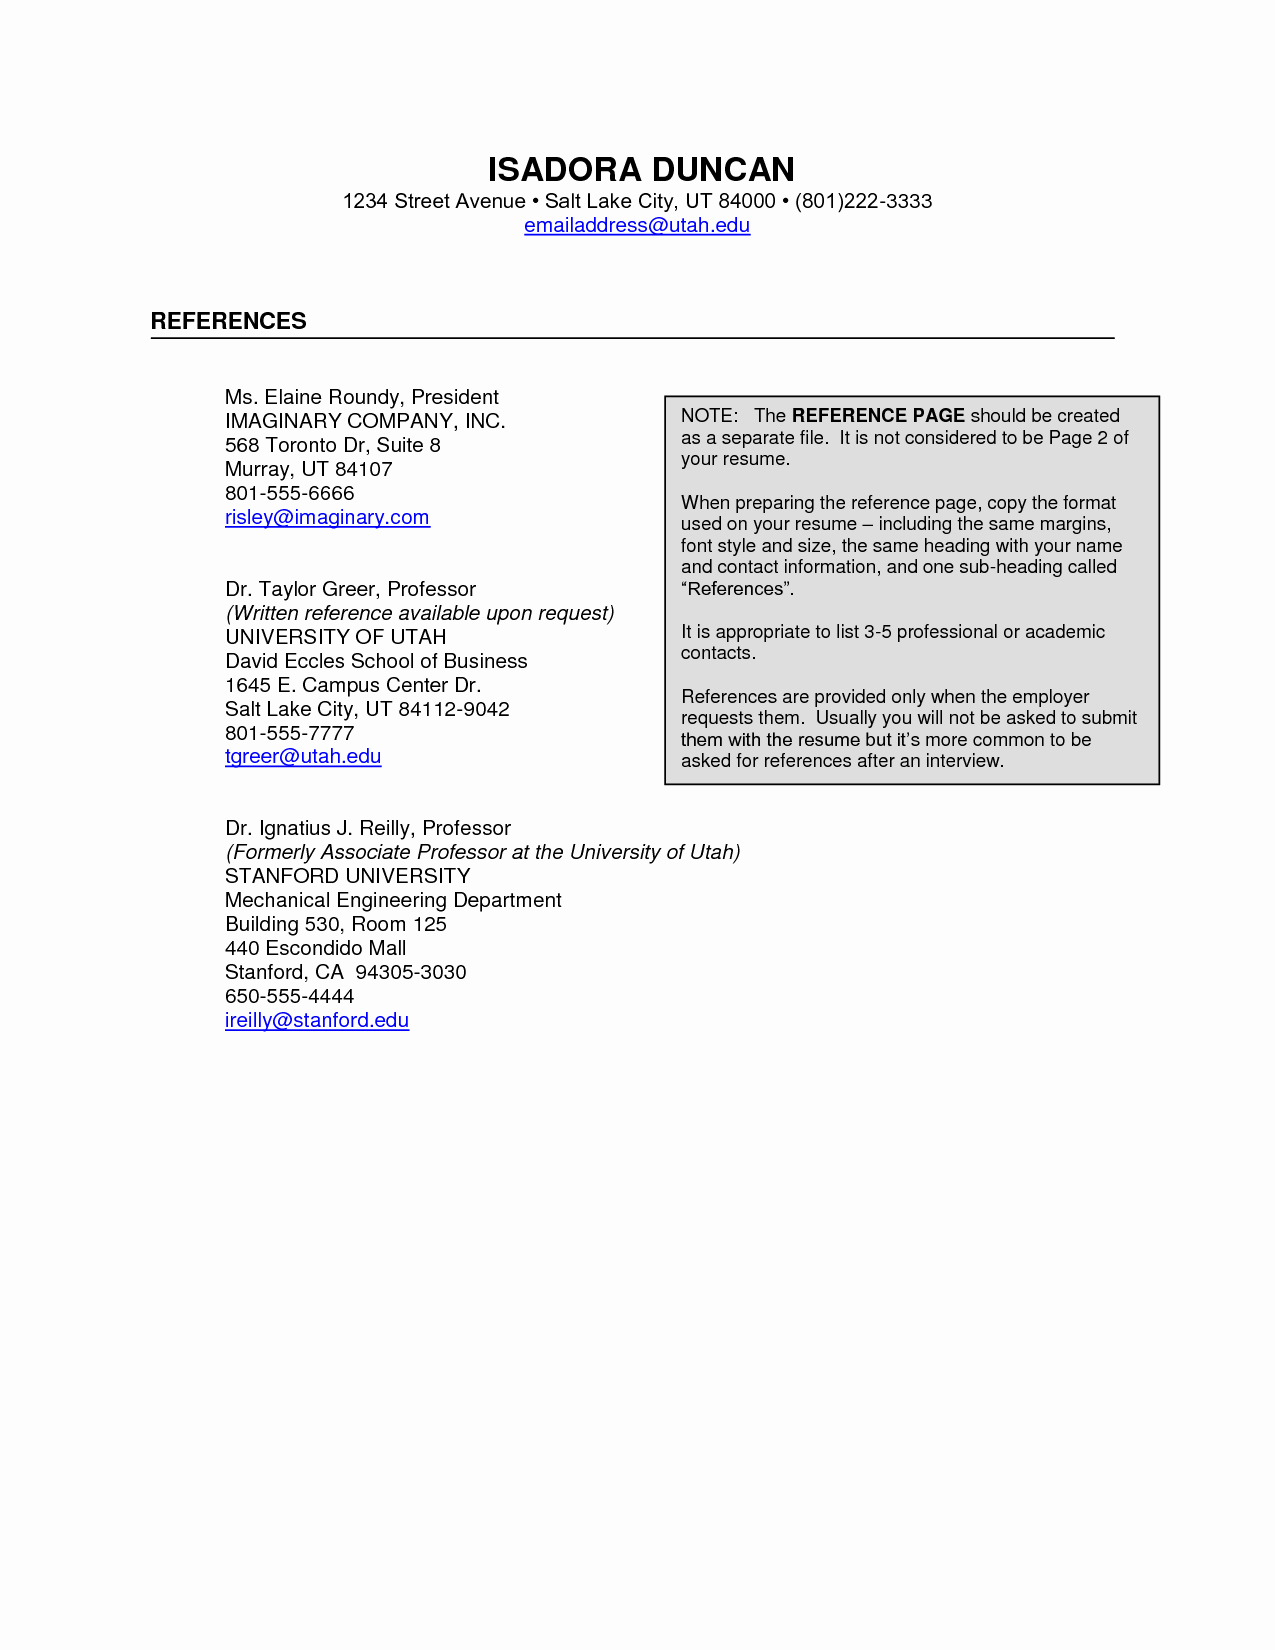 List Of Professional References Sample Luxury Resume Professional References Resume Ideas